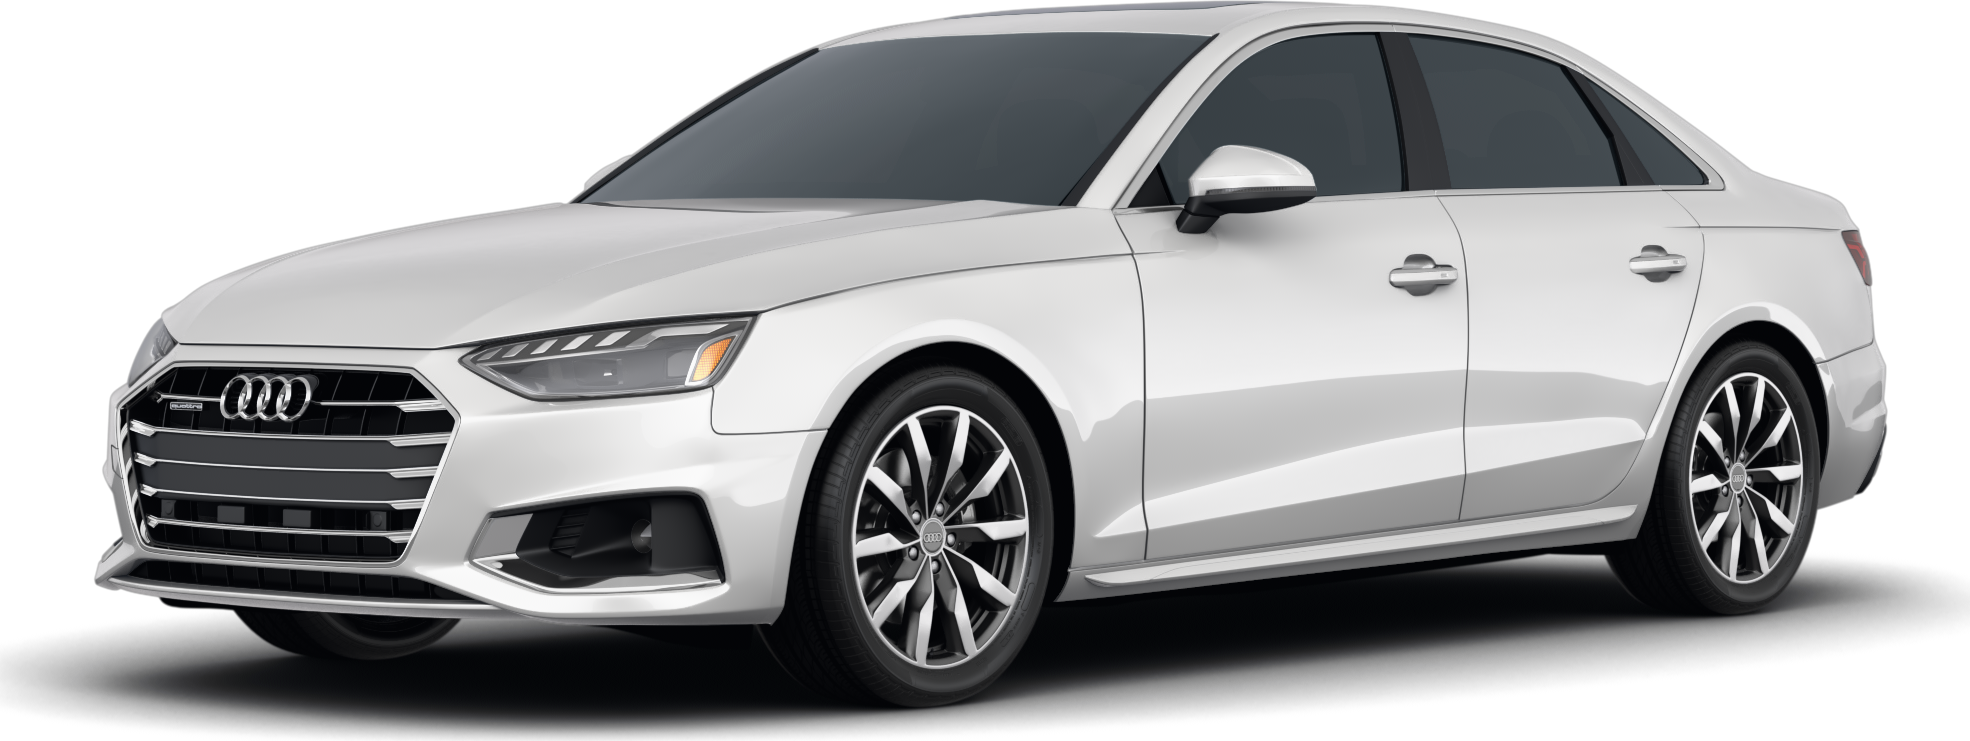 https://file.kelleybluebookimages.com/kbb/base/evox/CP/15034/2021-Audi-A4-front_15034_032_1970x741_T9T9_cropped.png